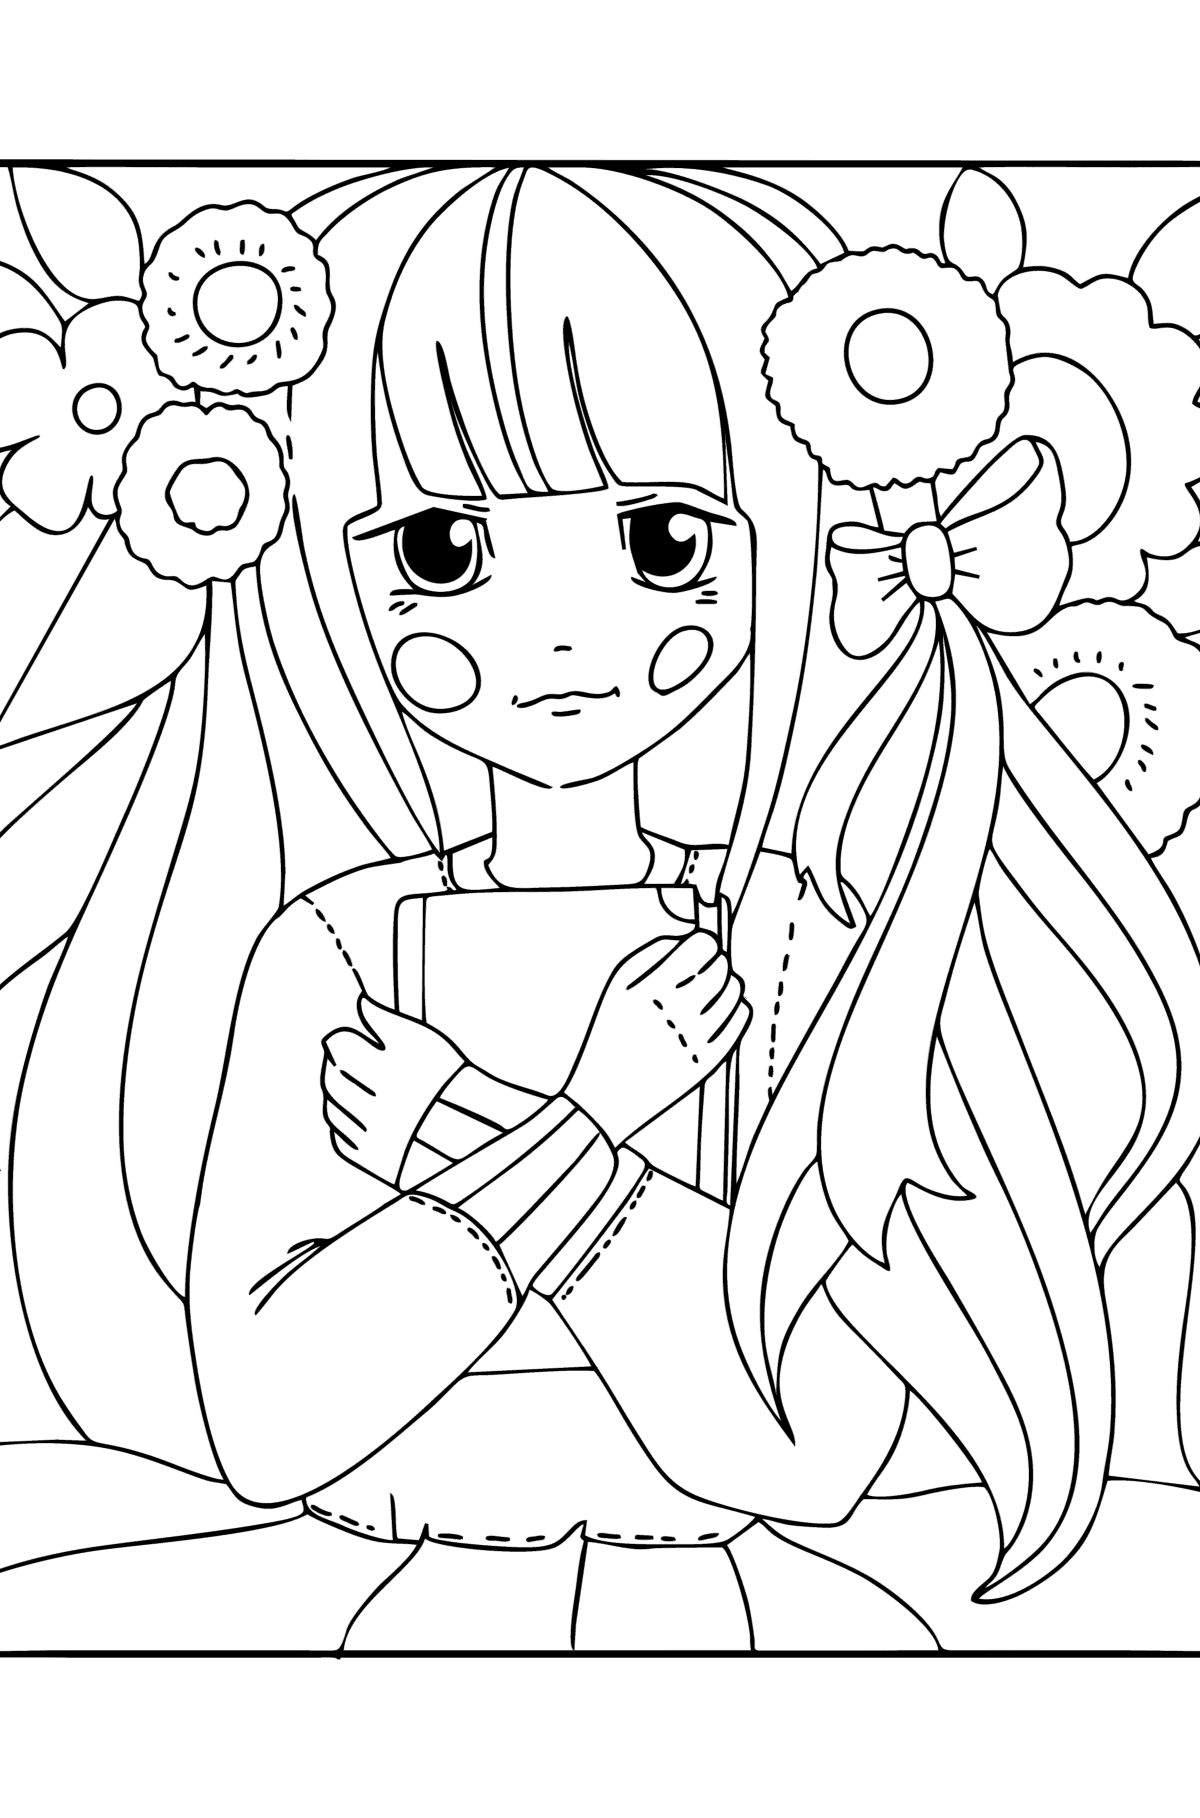 Zen girl coloring page - Coloring Pages for Kids